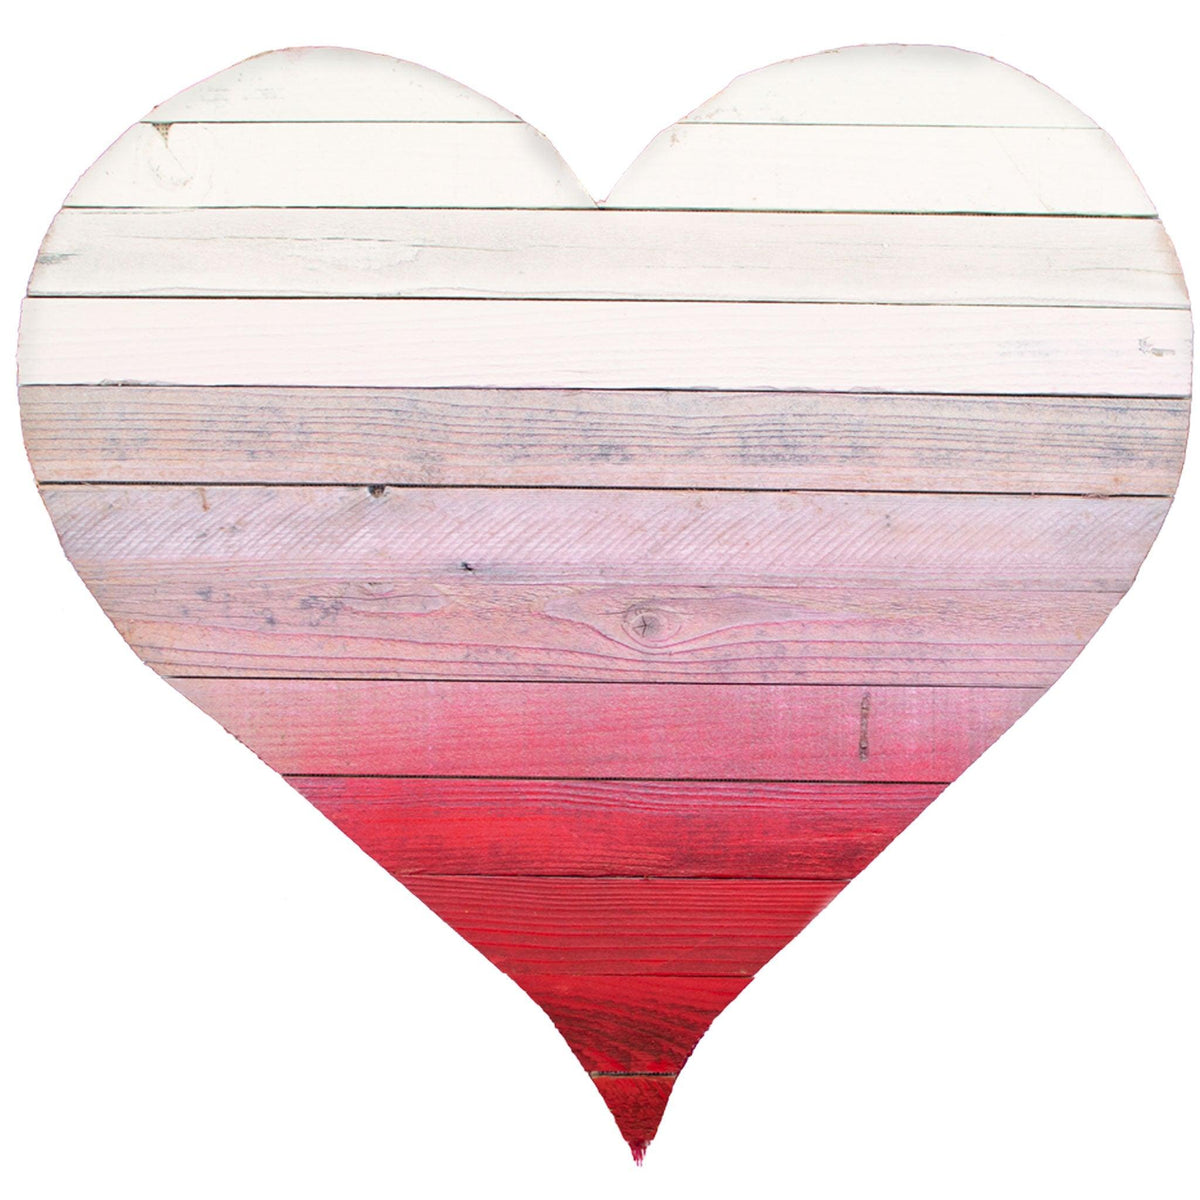 Lee Display's Valentine's Day Wood Heart with Fading Red to White Paint on sale now at leedisplay.com